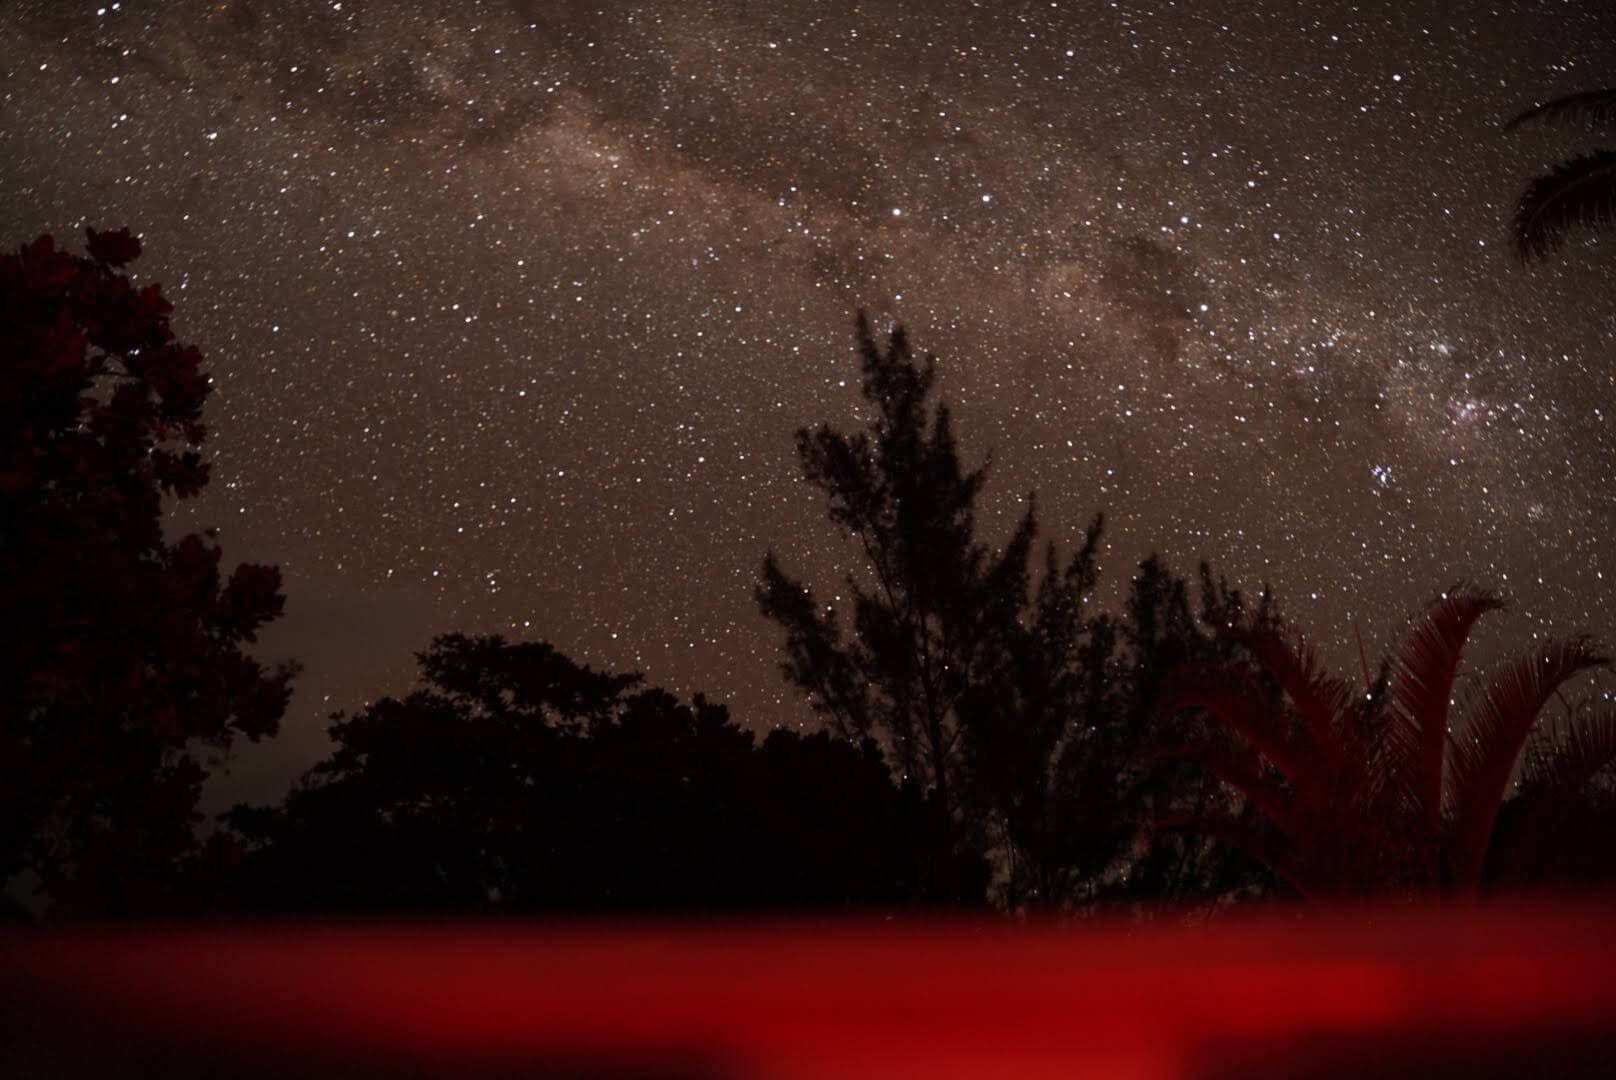 The milky way shows itself in this long-exposure of the skies south of Mahanoro